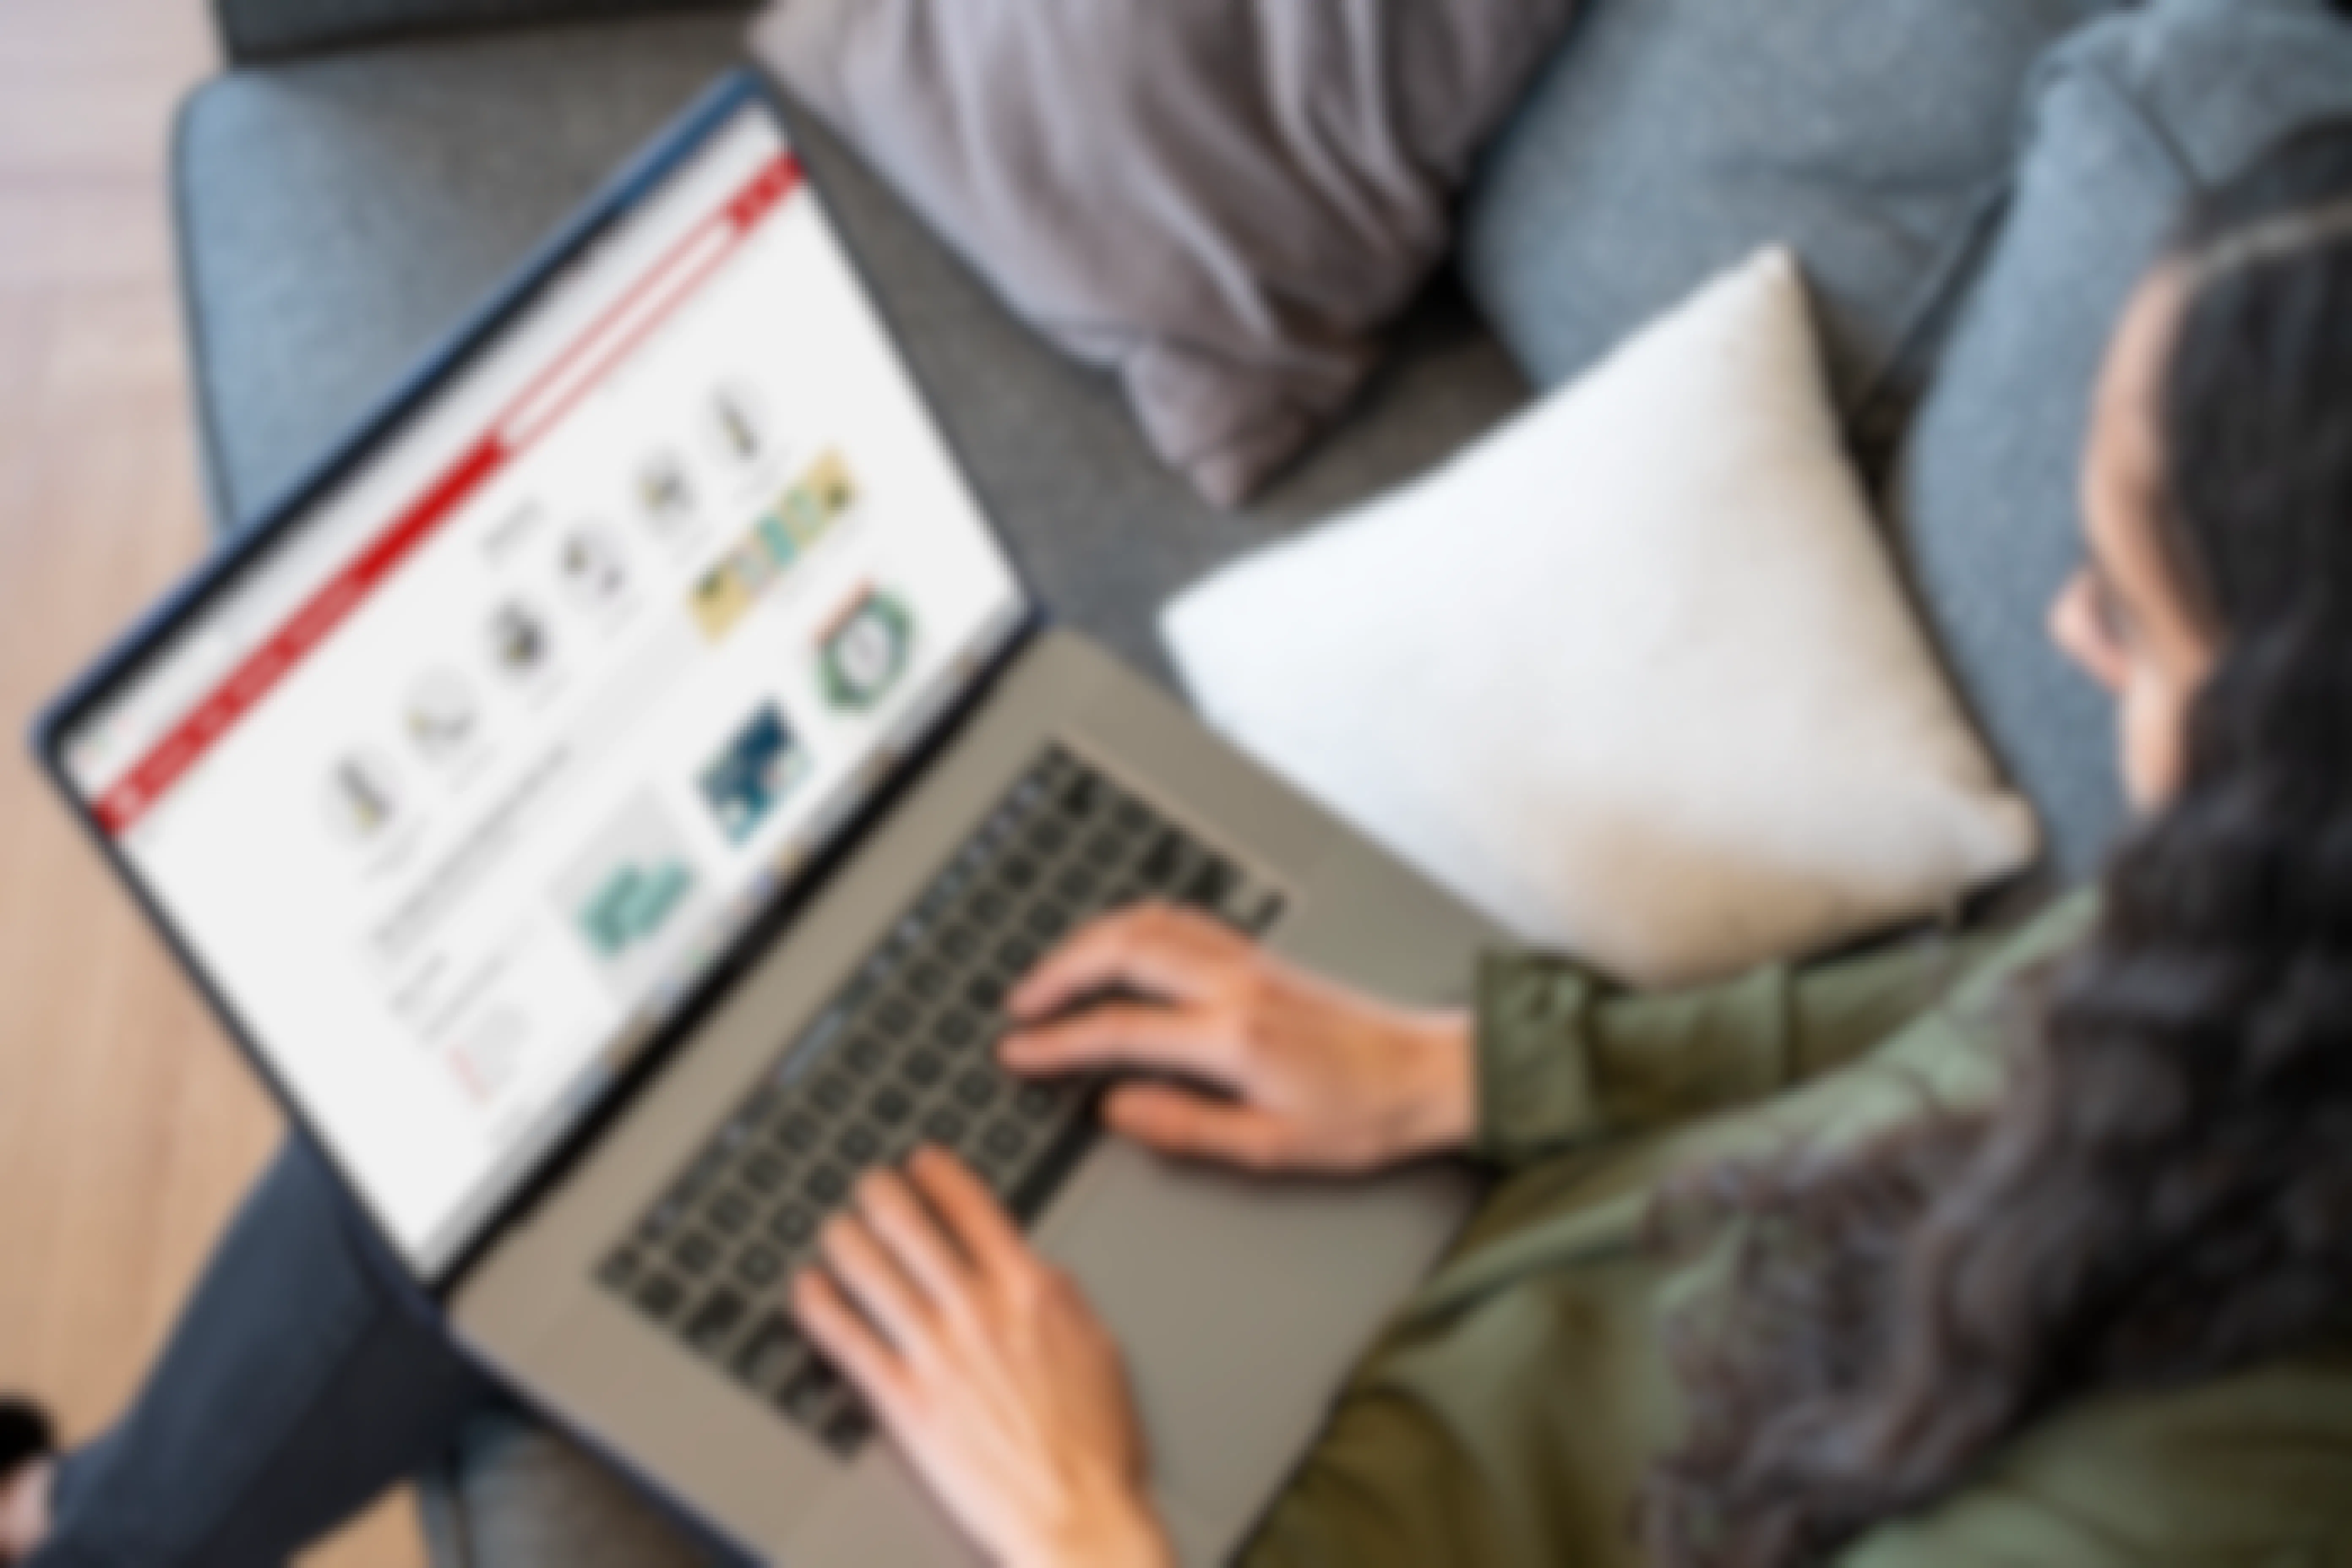 A Woman sitting on a sofa with a laptop on her lap displaying the target.com clearance page